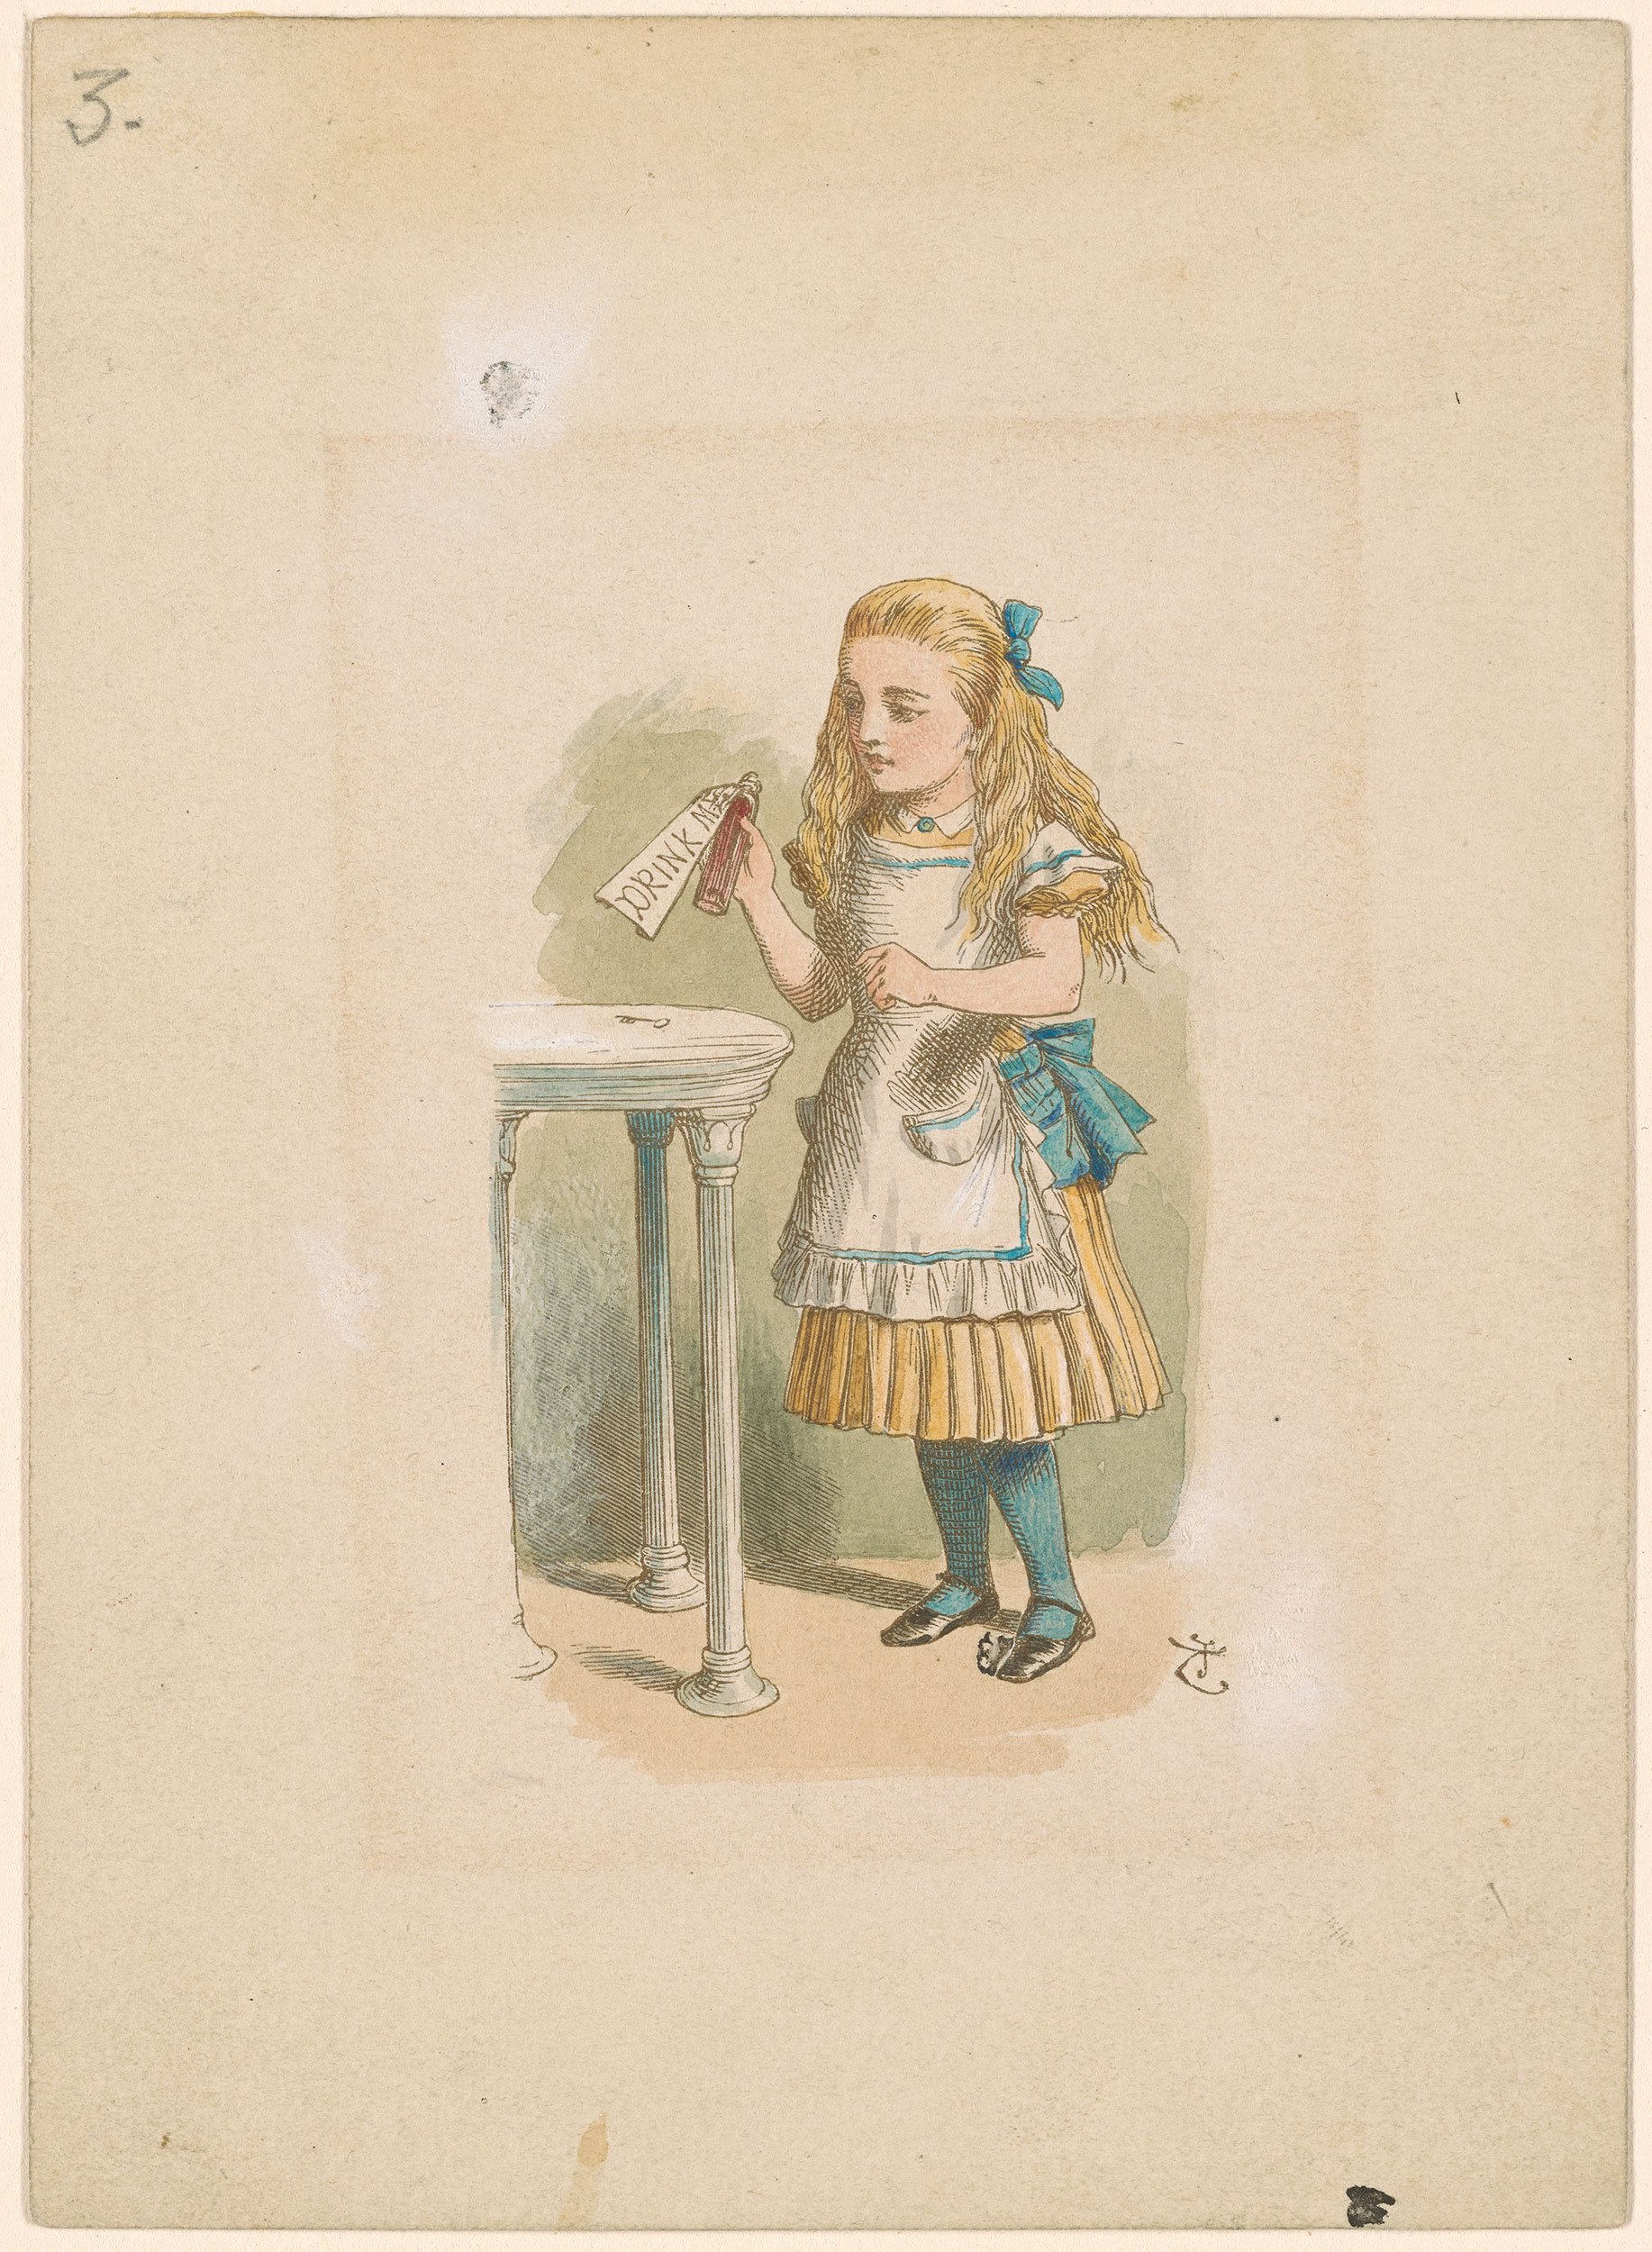 An illustration of Alice, a young child, holding a bottle with a "Drink Me" label attached to it.